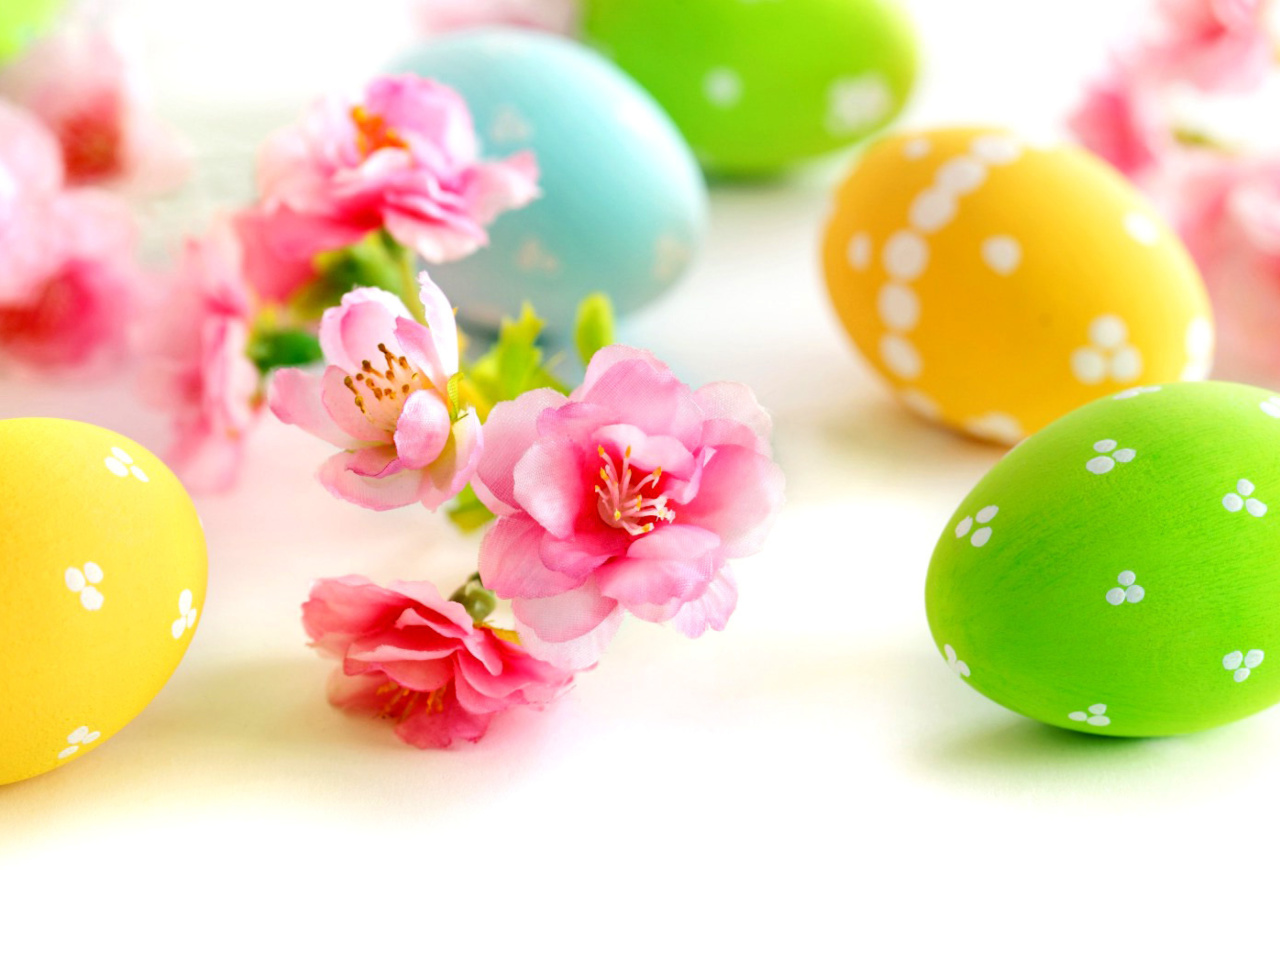 Das Easter Eggs and Spring Flowers Wallpaper 1280x960